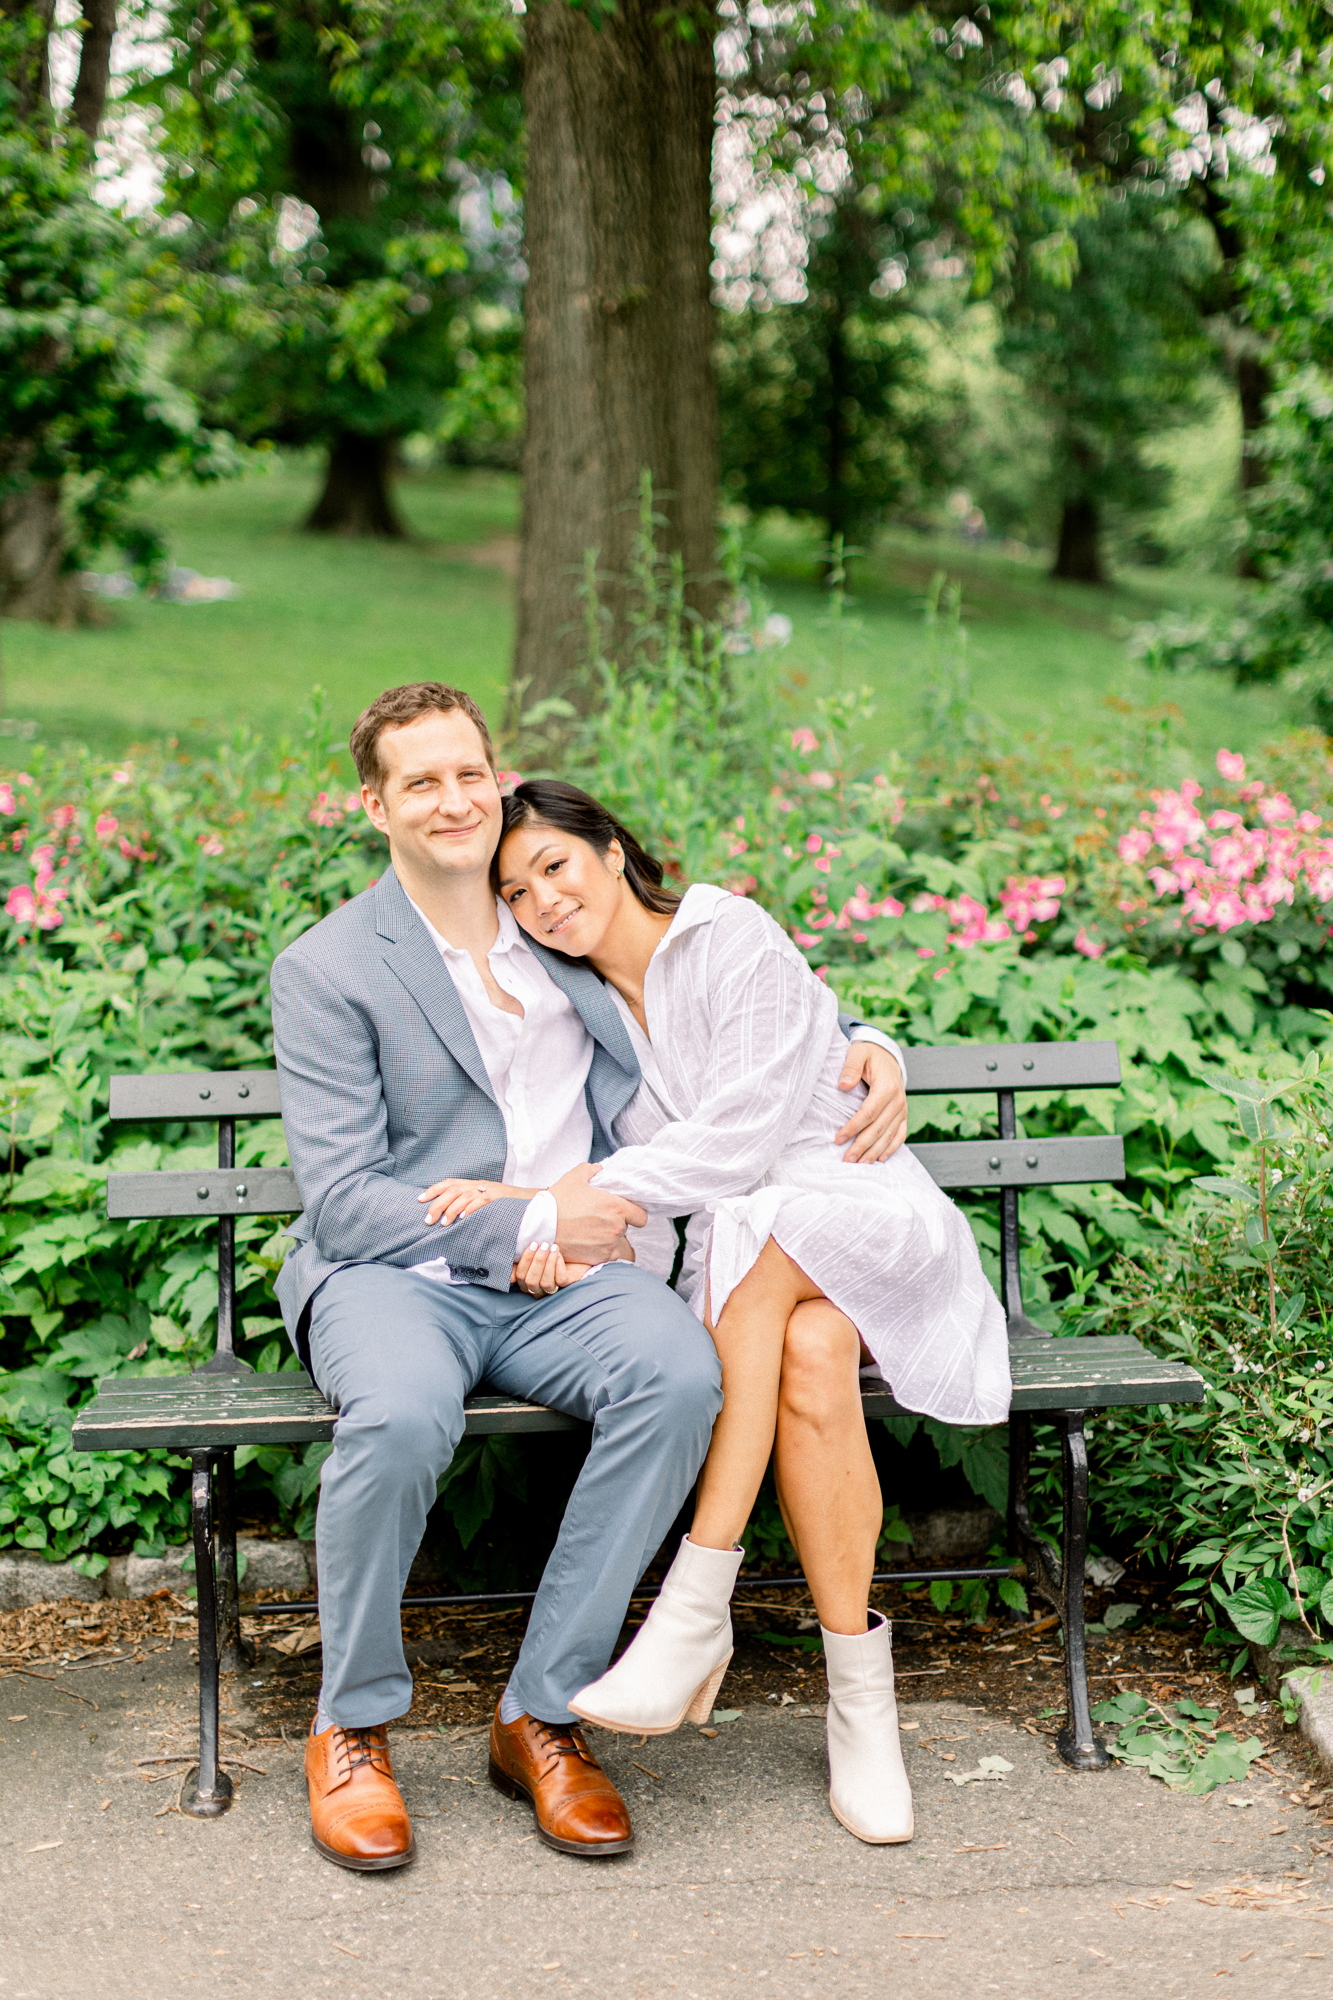 Personal Pose Ideas for your Engagement Session